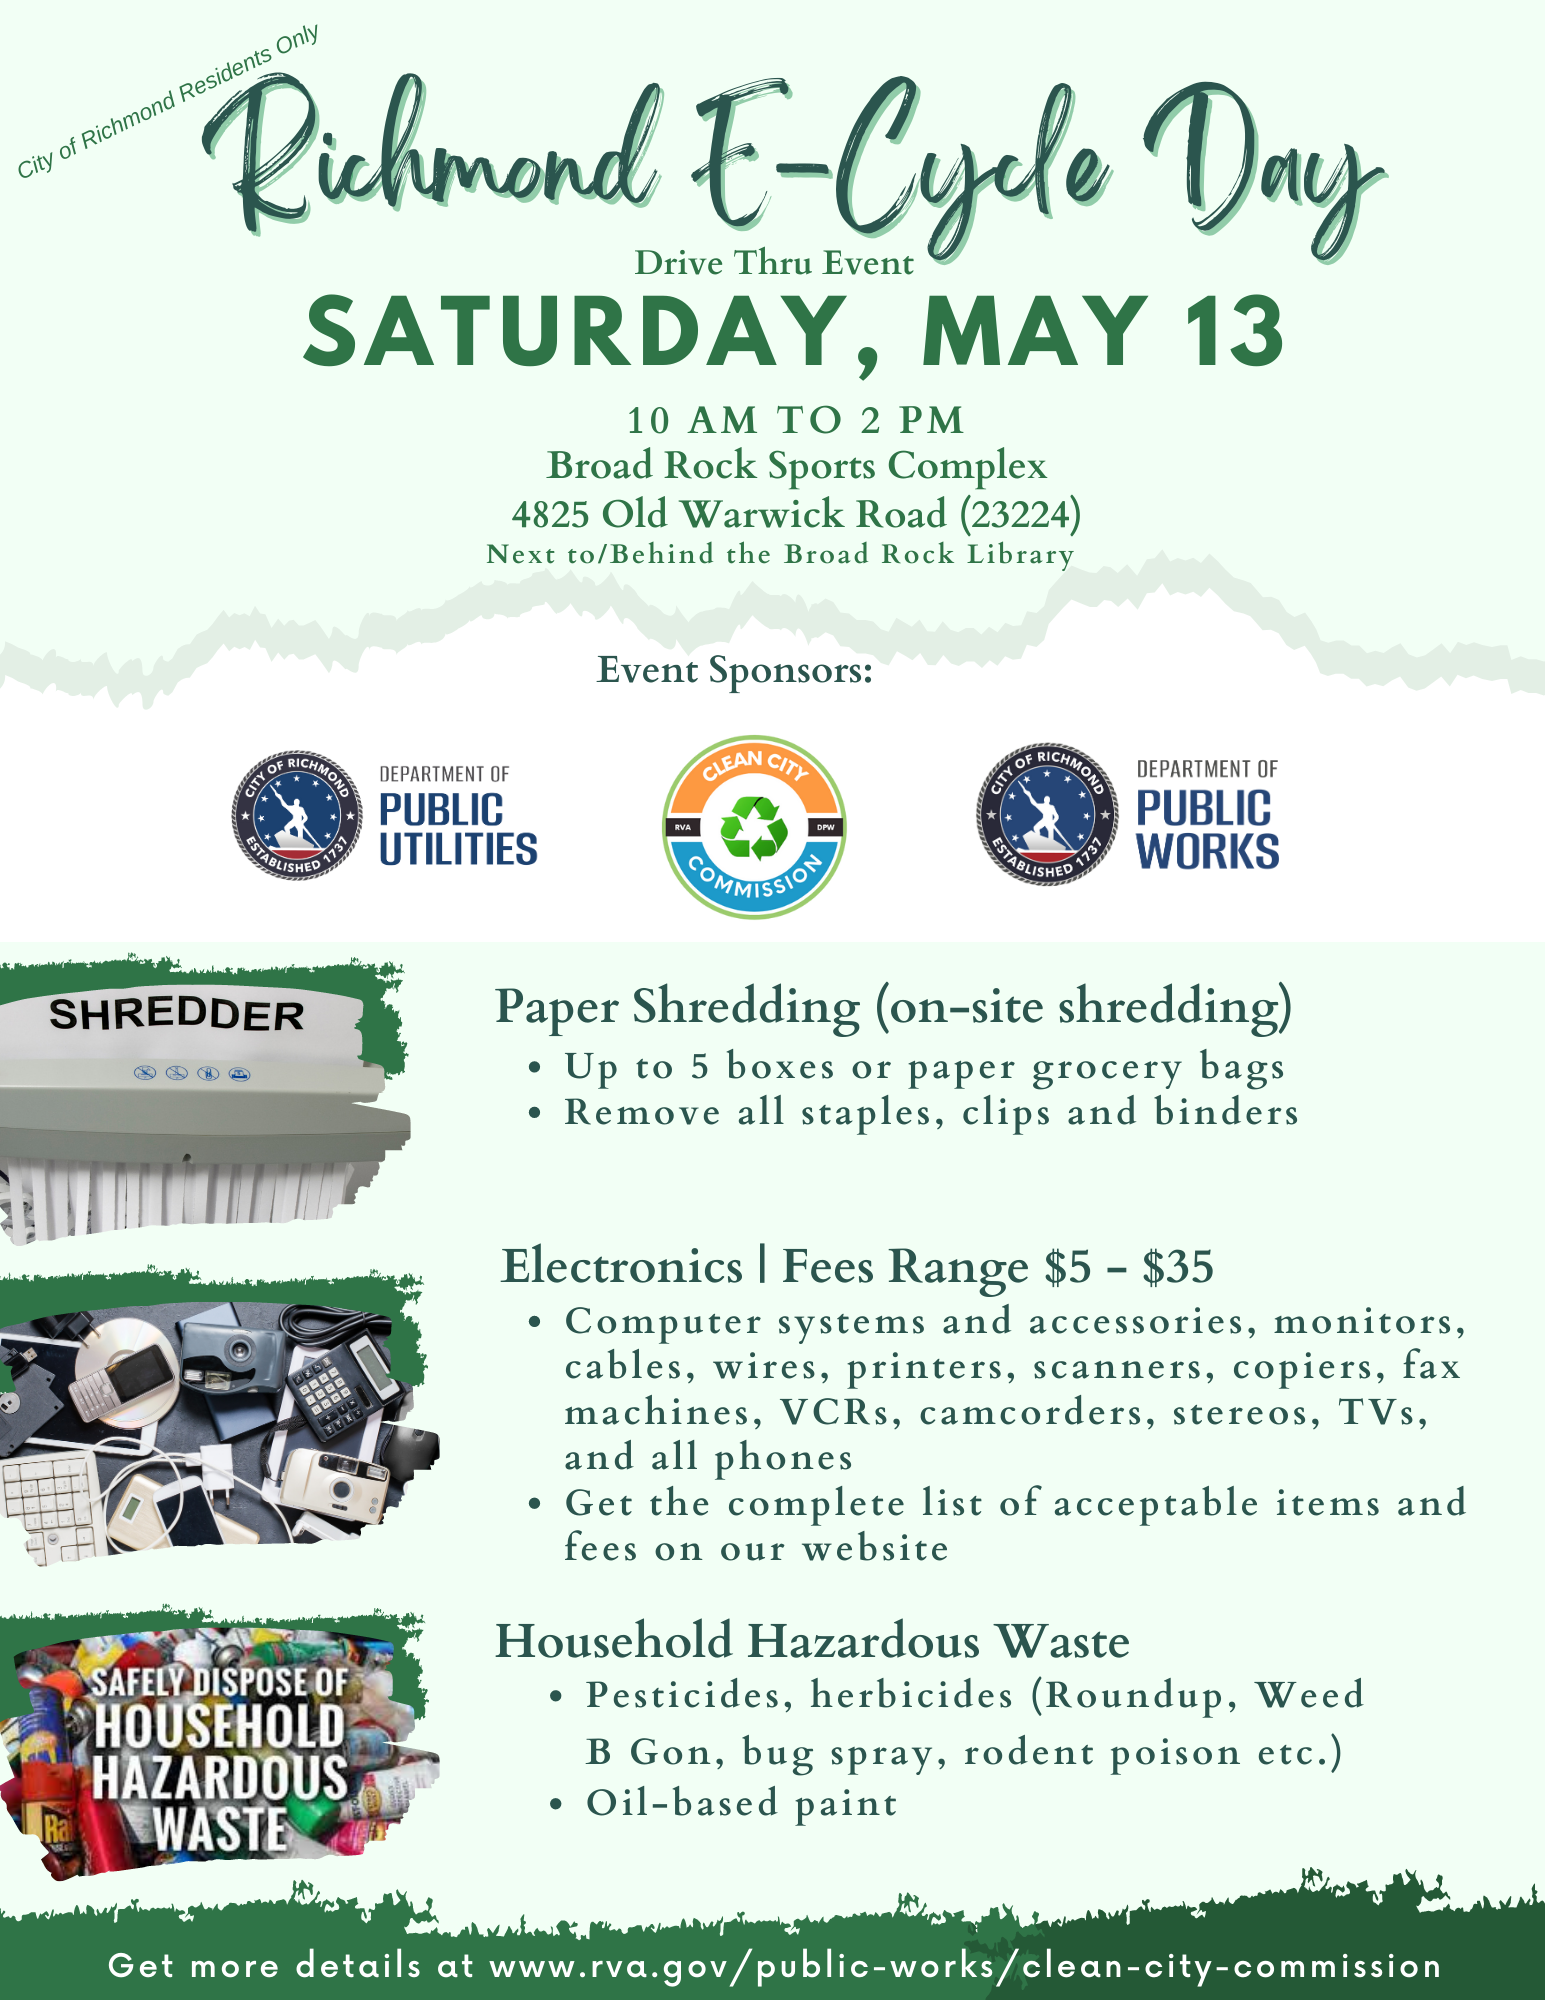 Image - Richmond E-Cycle Event - May 13 2023 with details